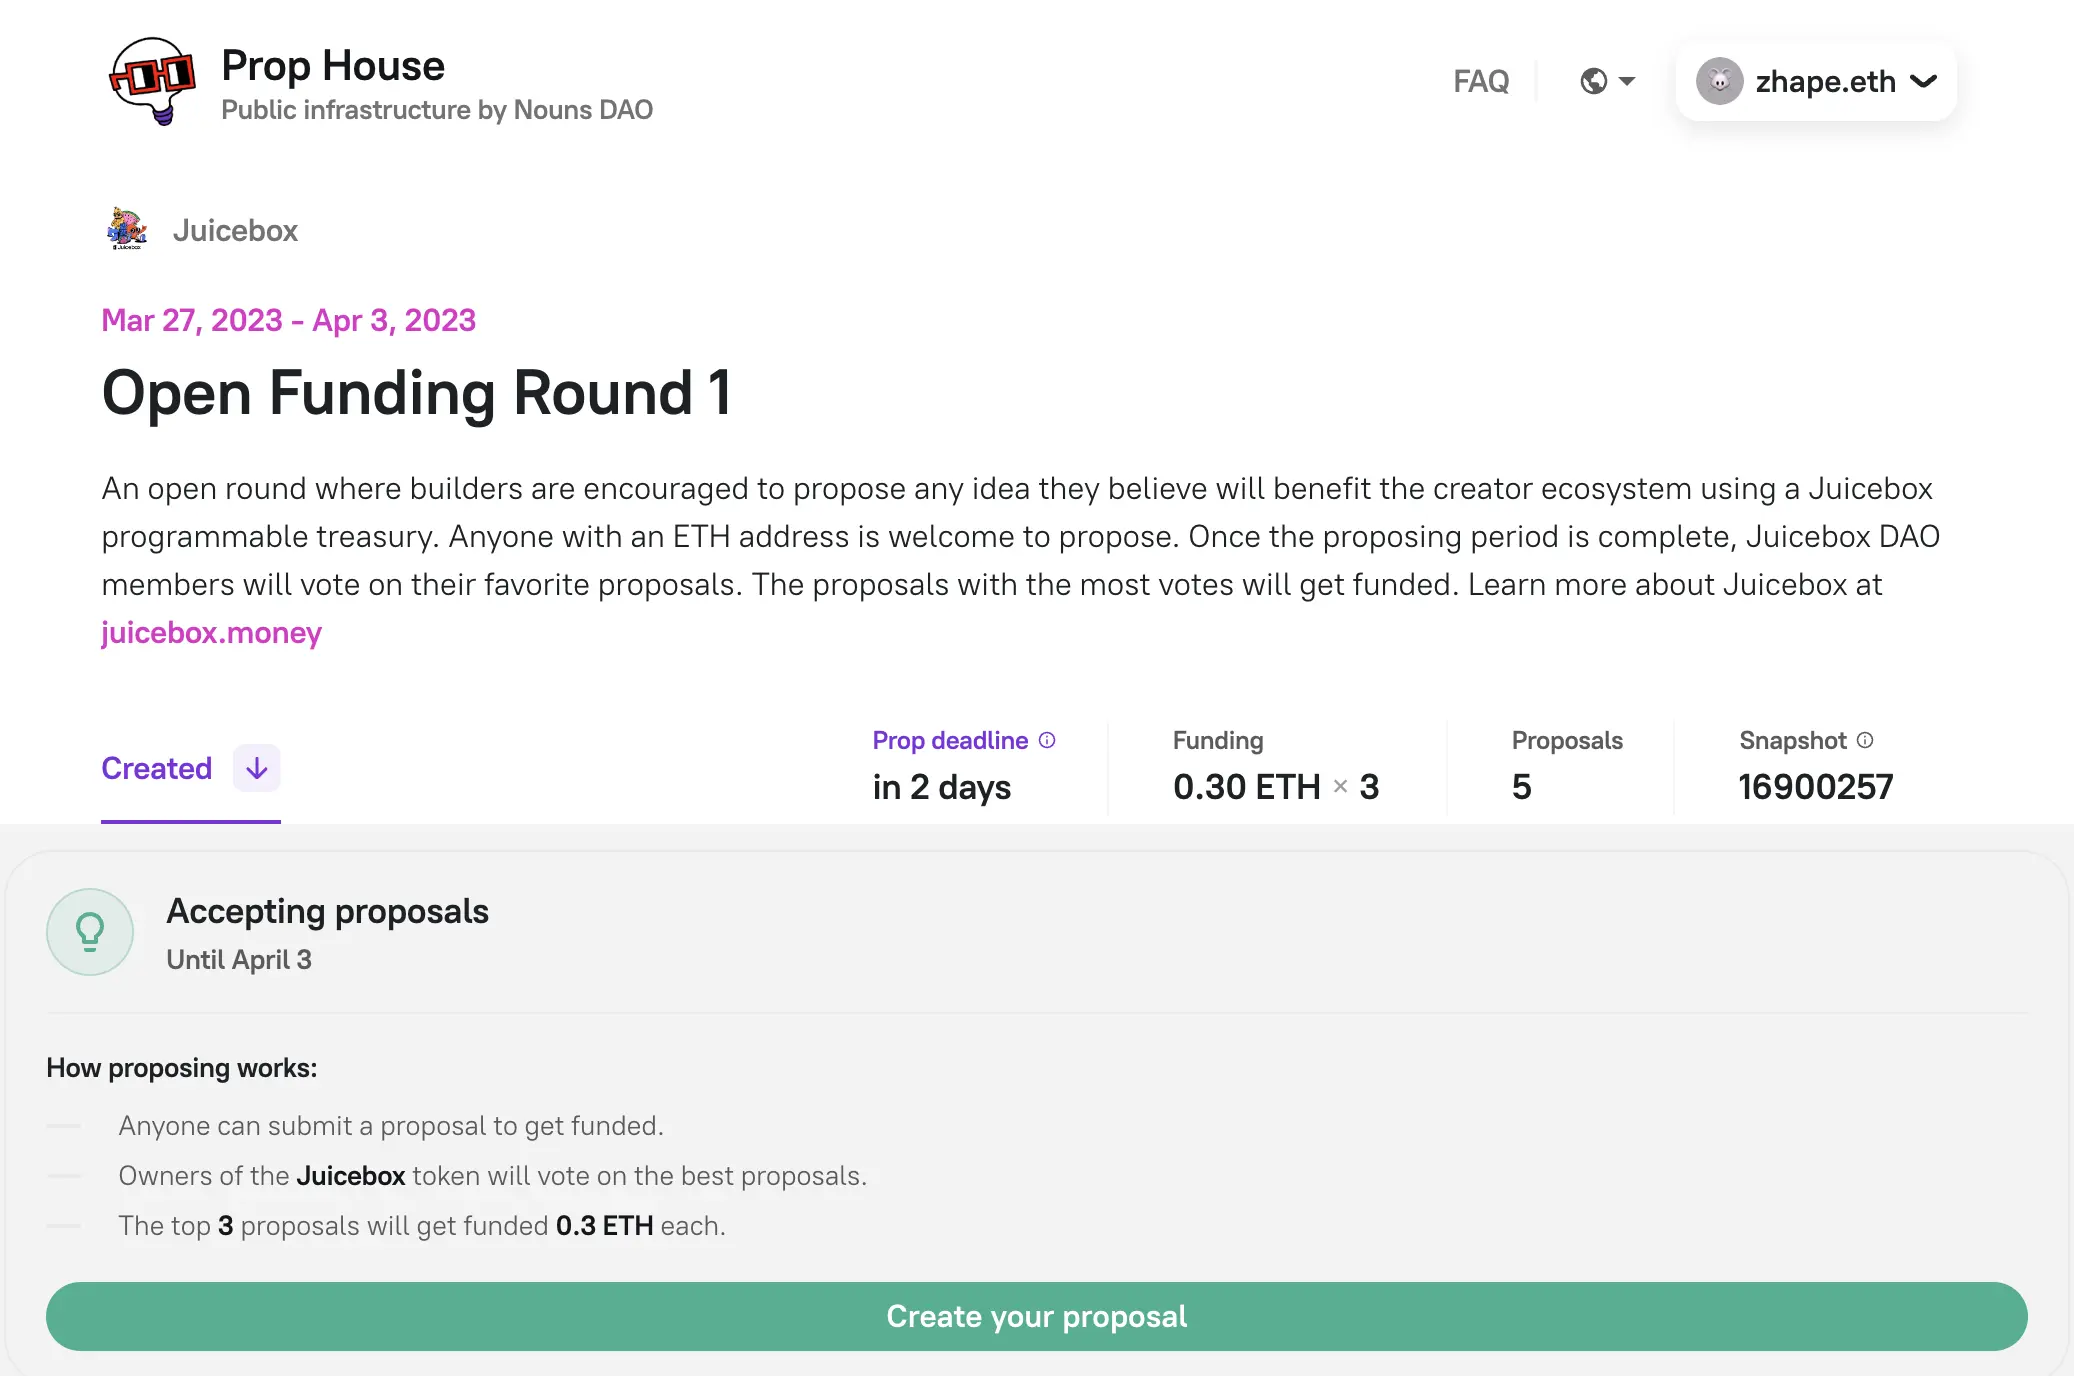 Prop House open round for Juicebox